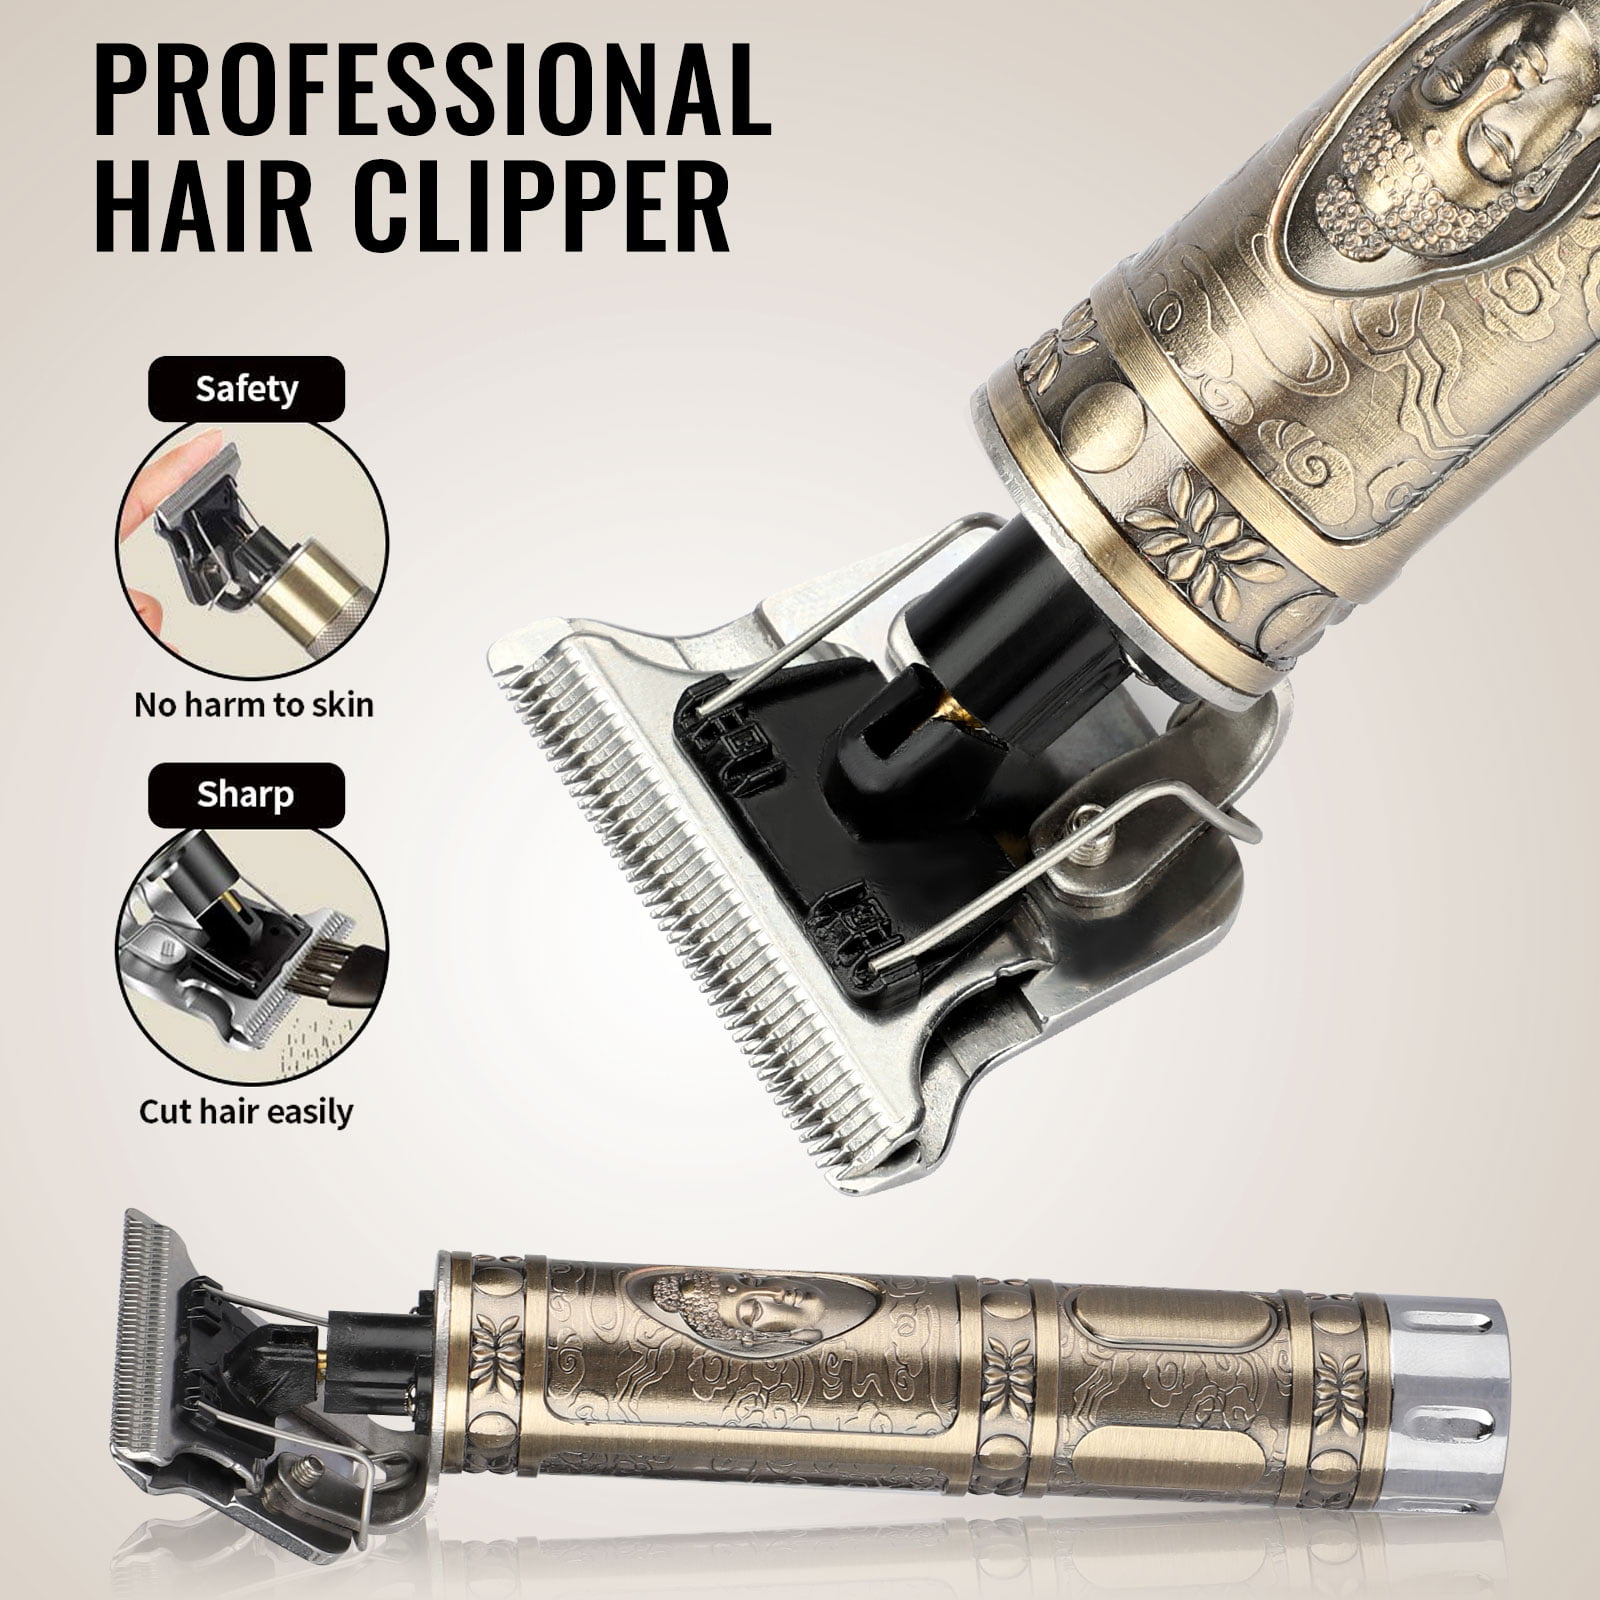 how to sharpen hair clippers at home